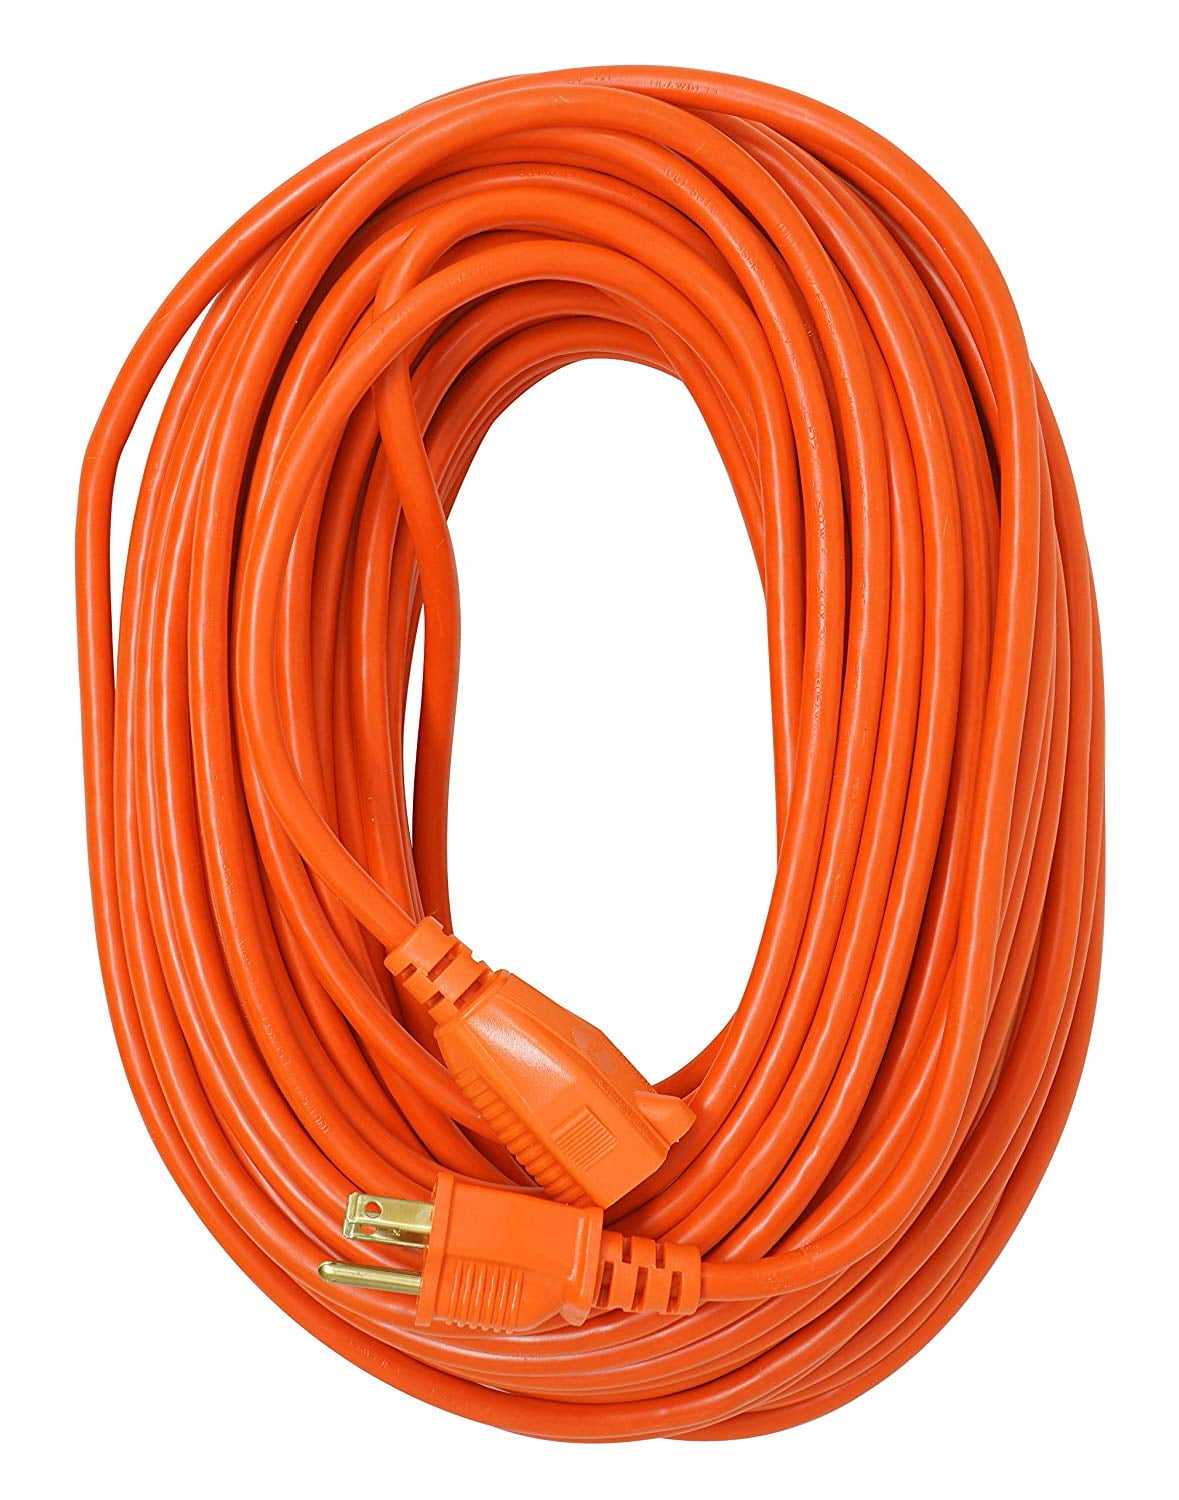 flame retardant Water resistant Rocky Mountain Cable Outdoor Extension Cord Orange 3 Prong Ultra flexible 16/3 Heavy Duty Vinyl Weather resistant 15 feet Reinforced for durability 